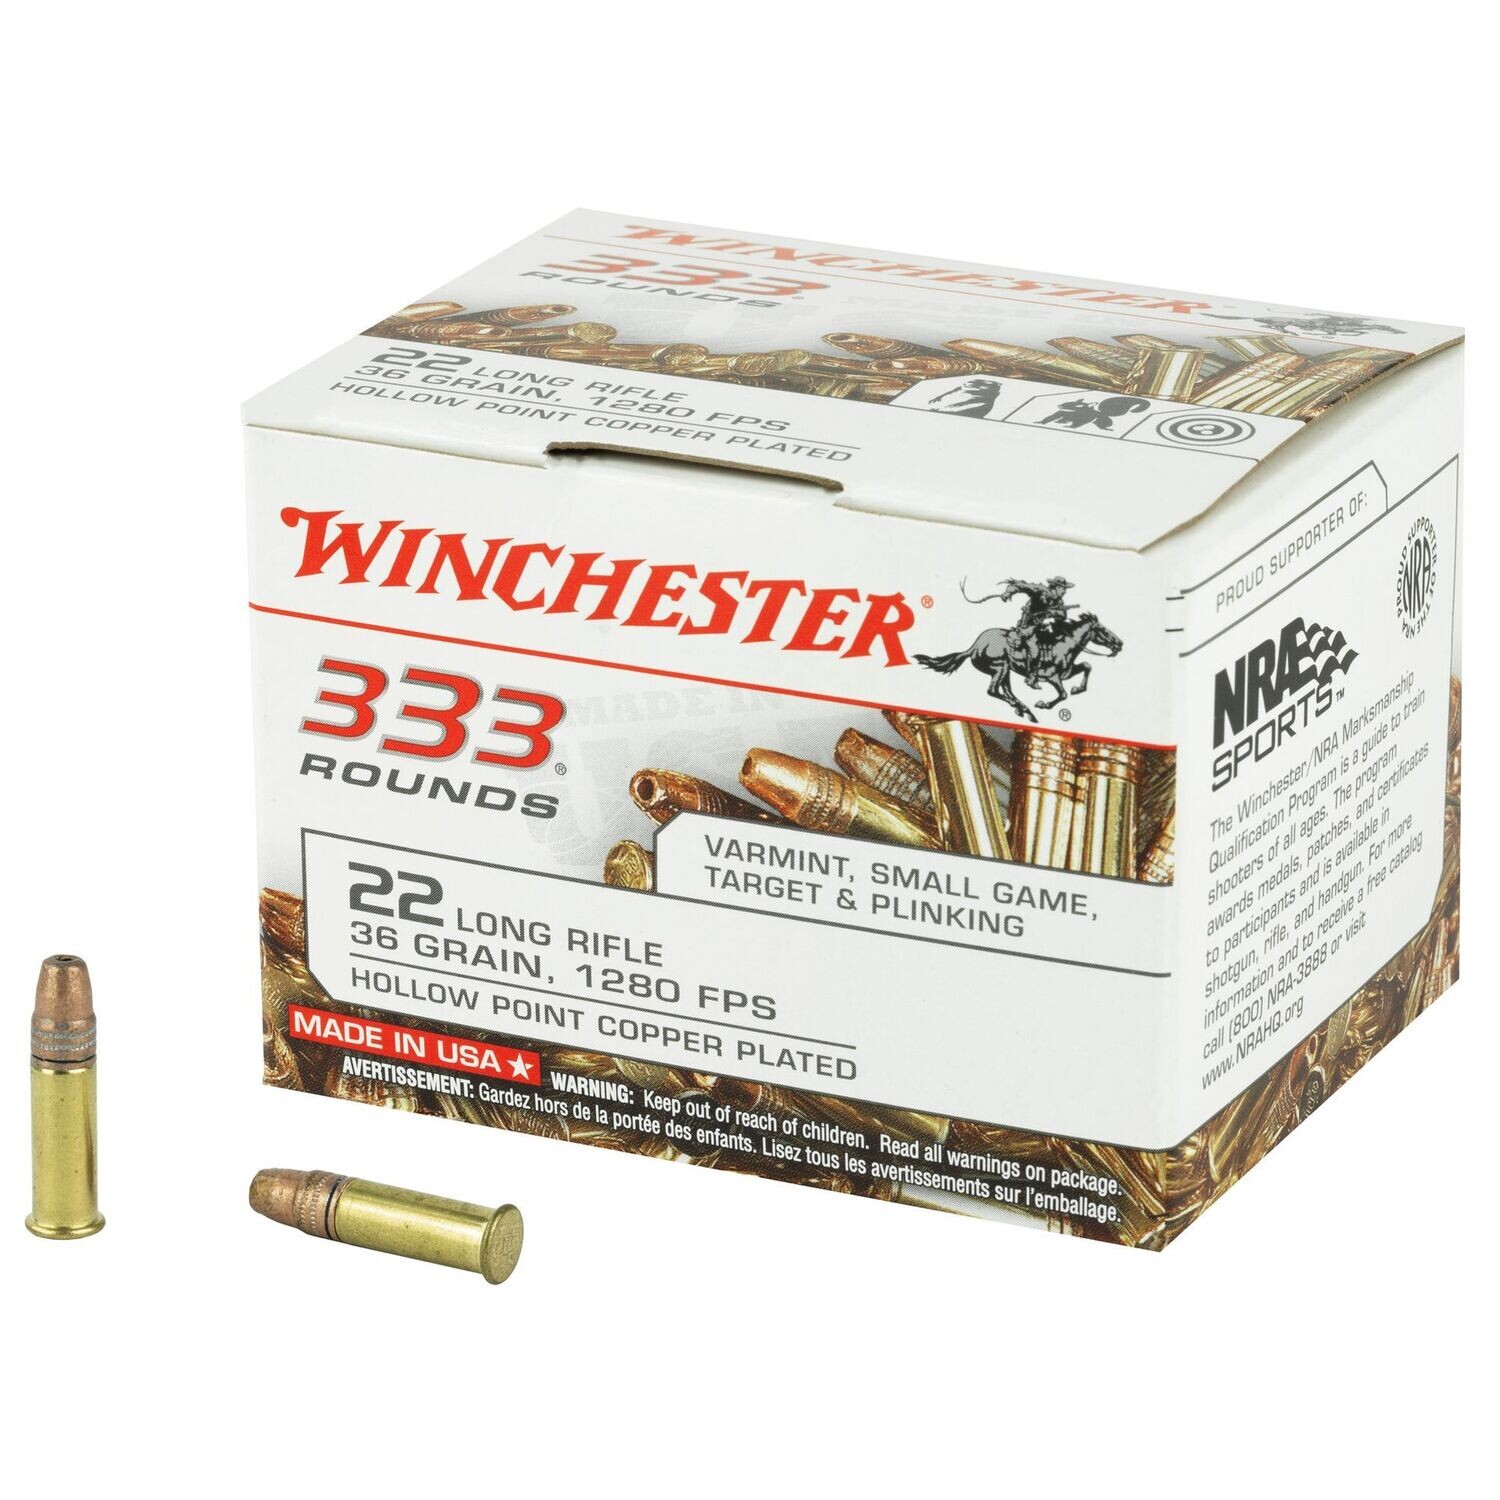 WINCHESTER 22LR 36GR CPR HP 333/3330